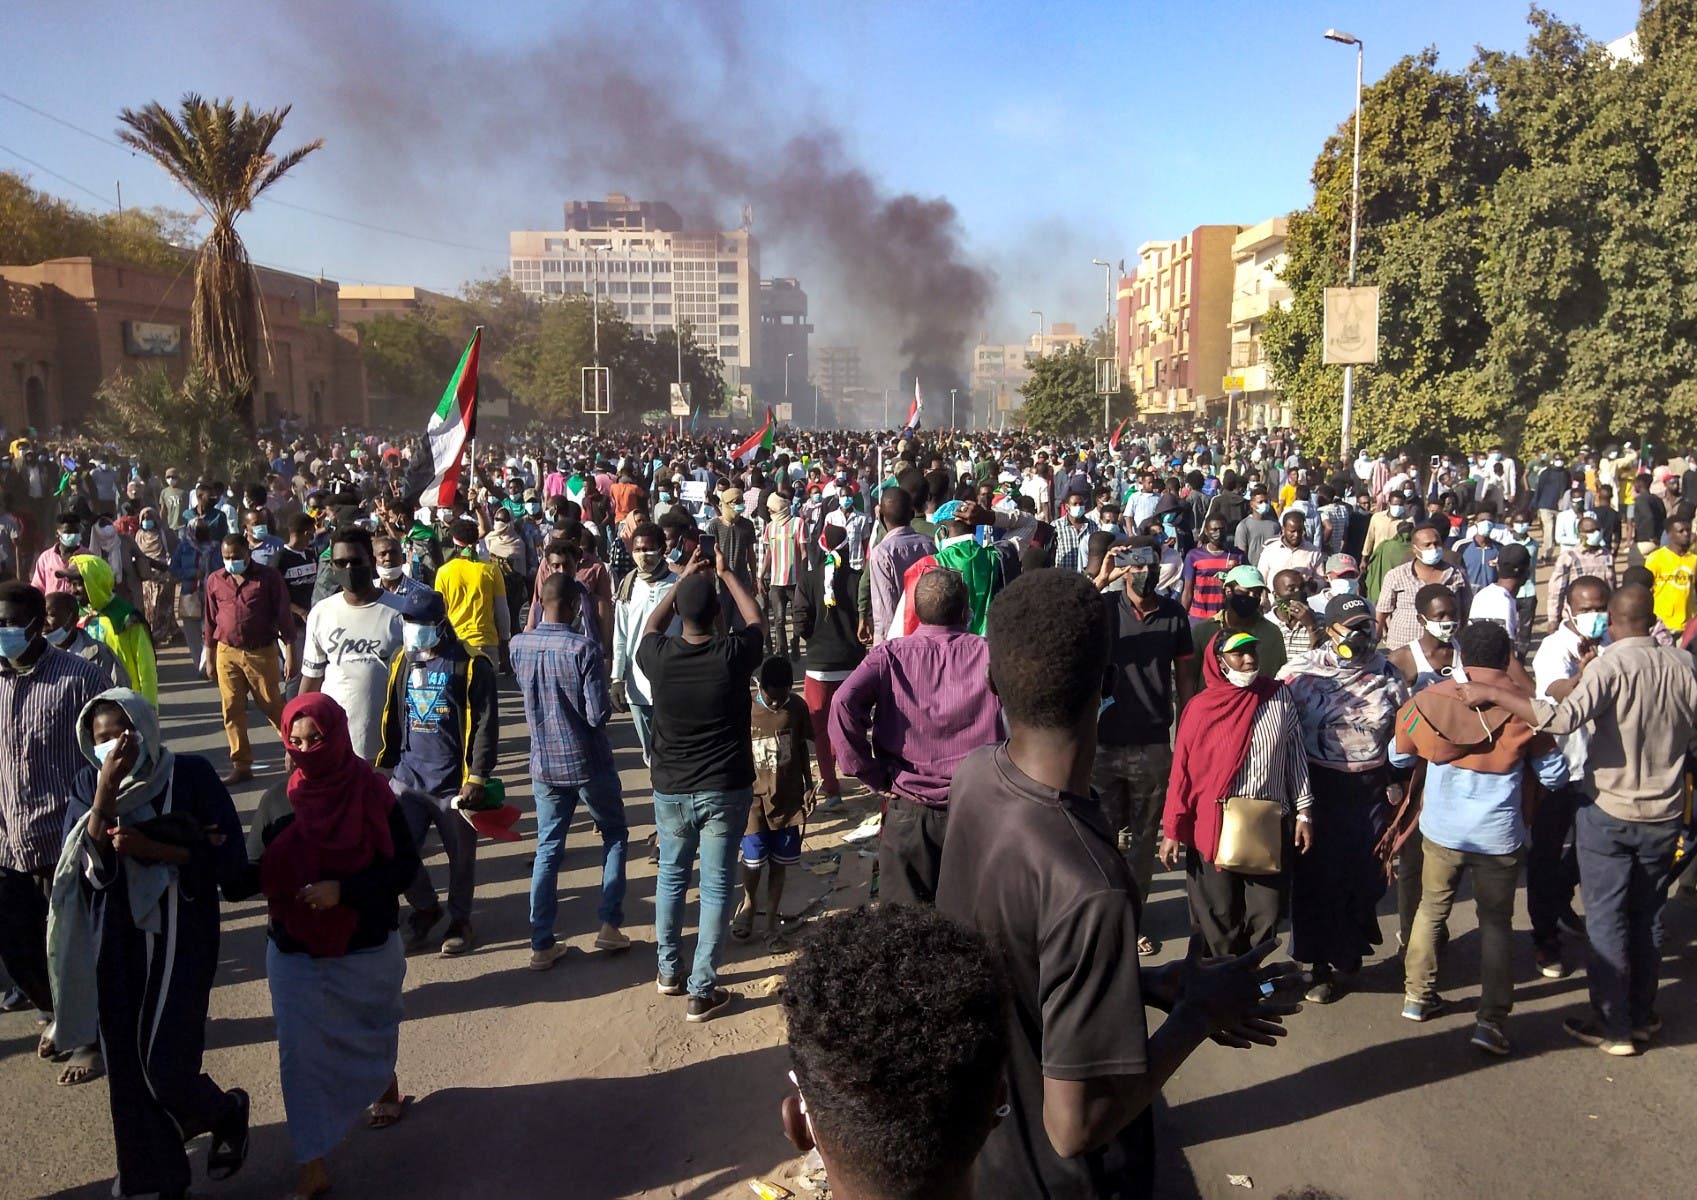 Protesters near the presidential palace in Khartoum .. and gas security fire